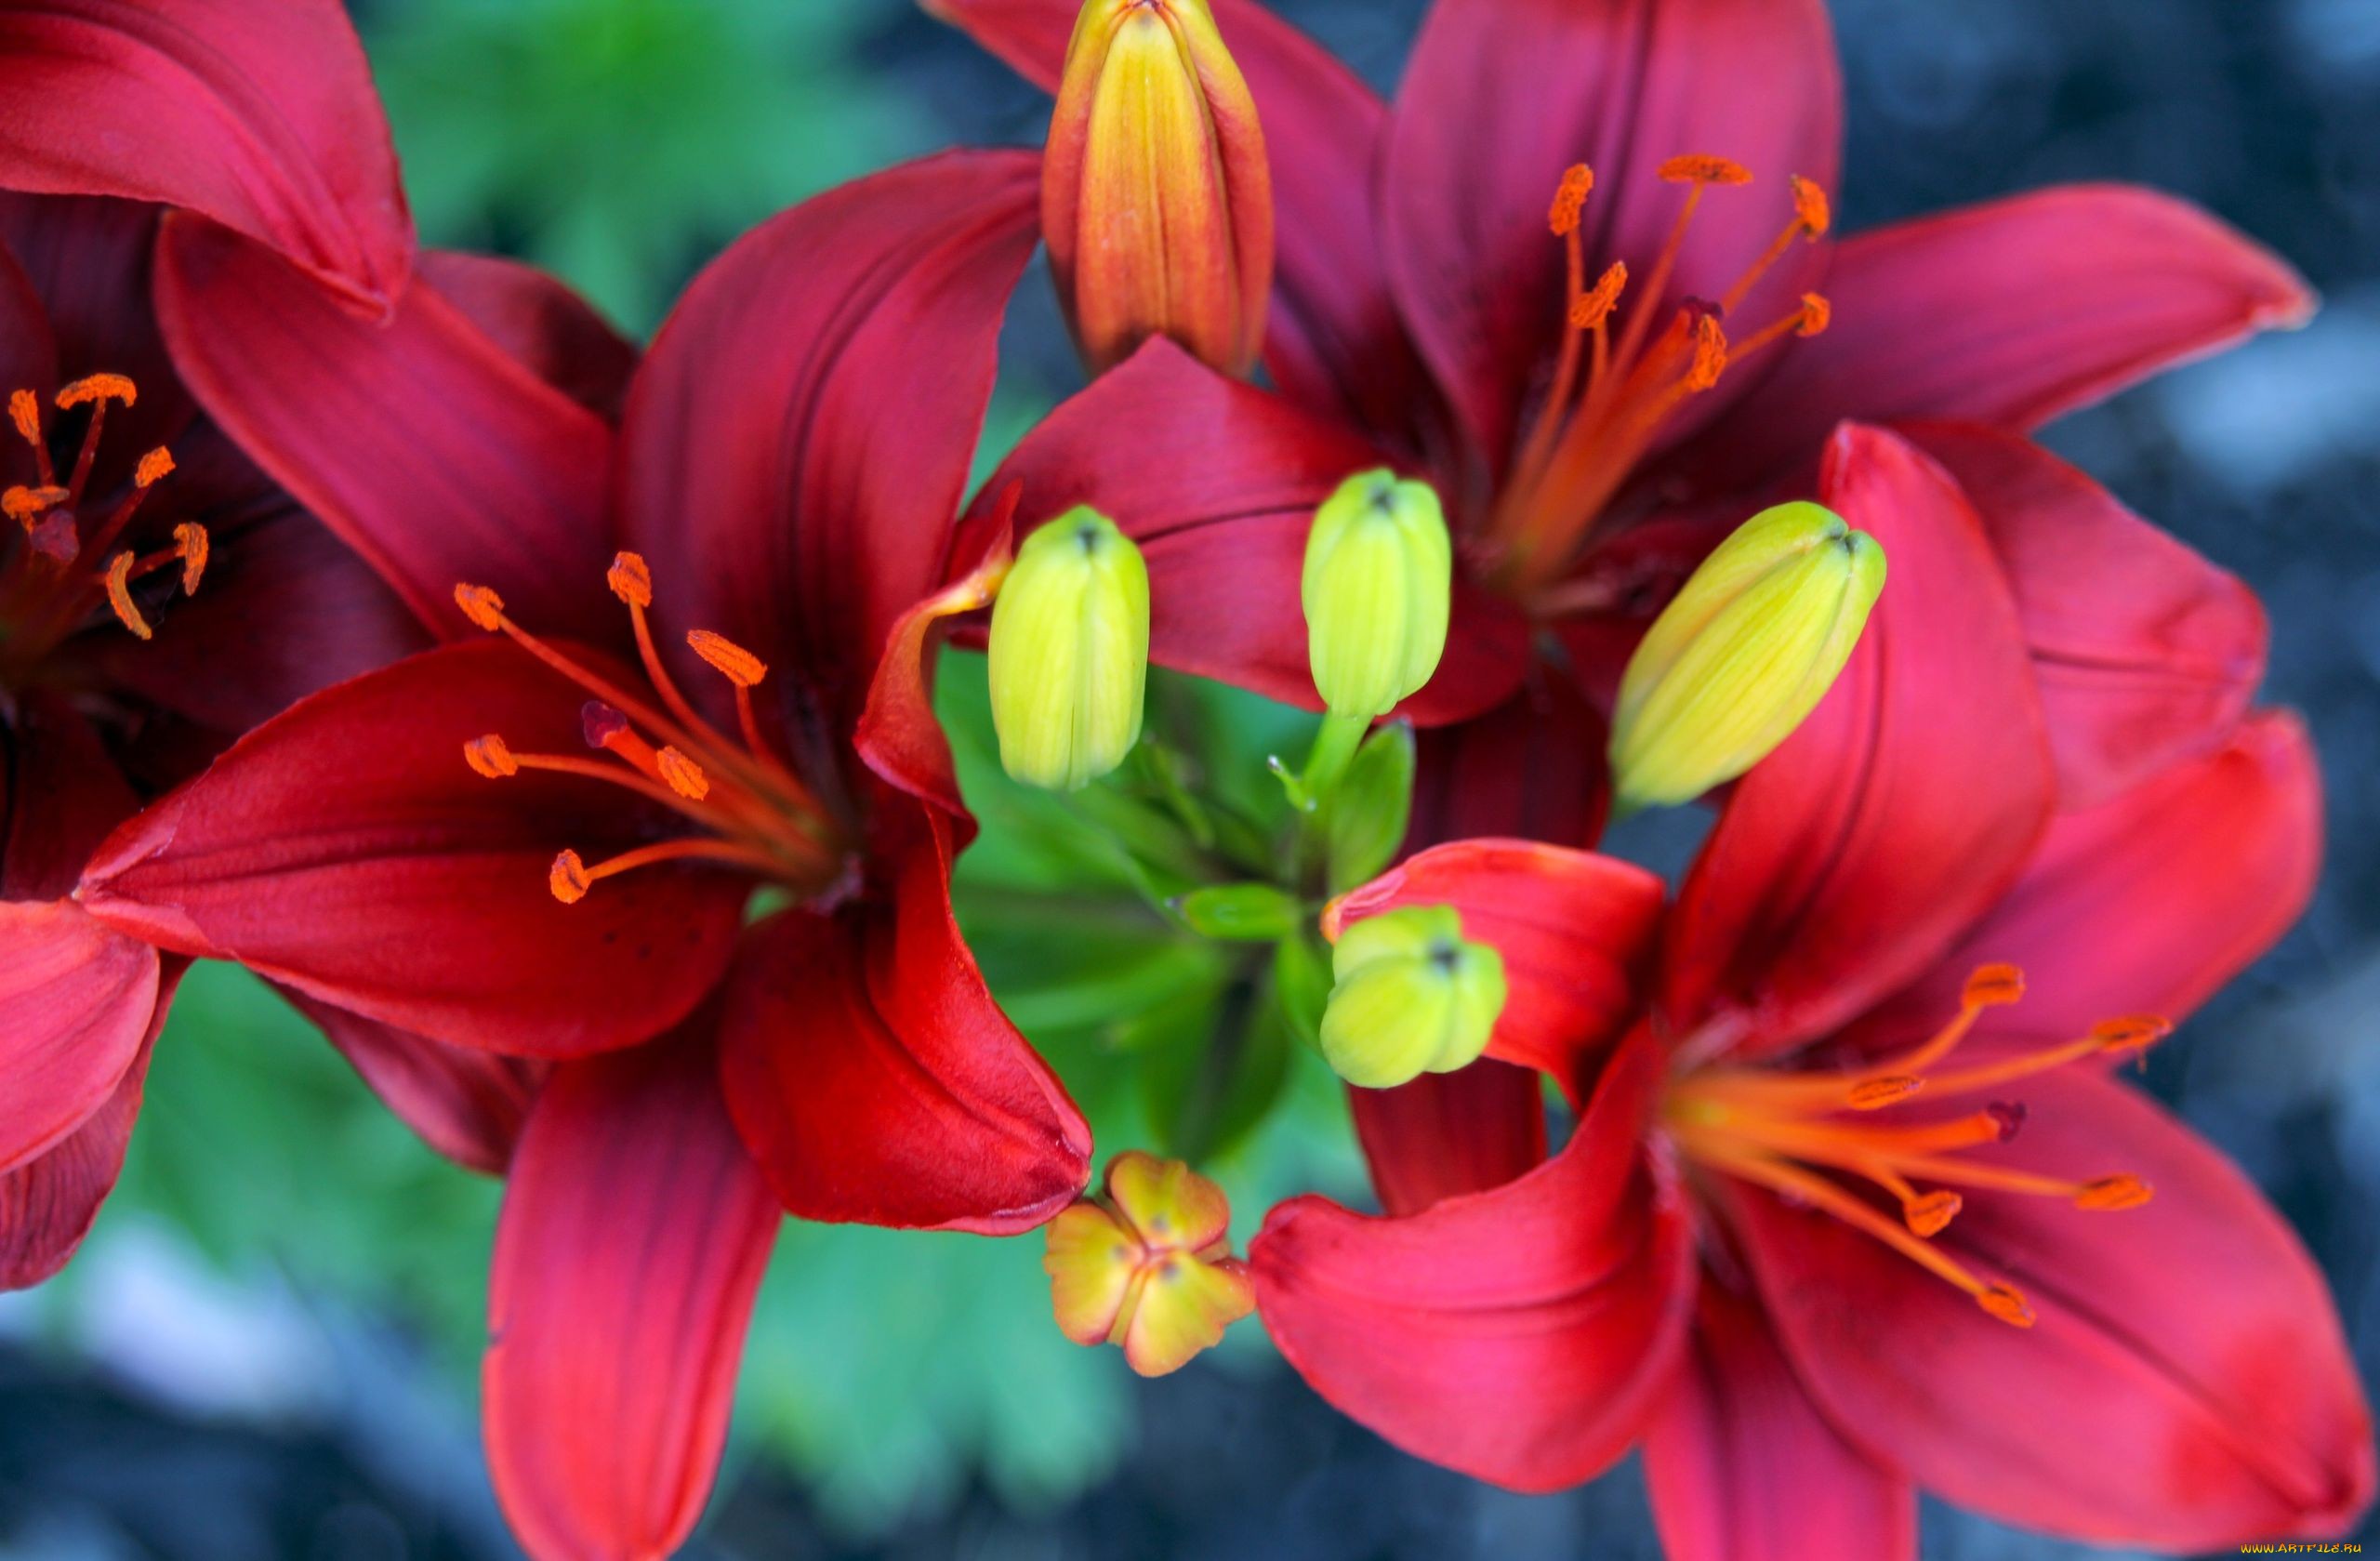 Top 10 Most Amazing HD Flowers Images in the World